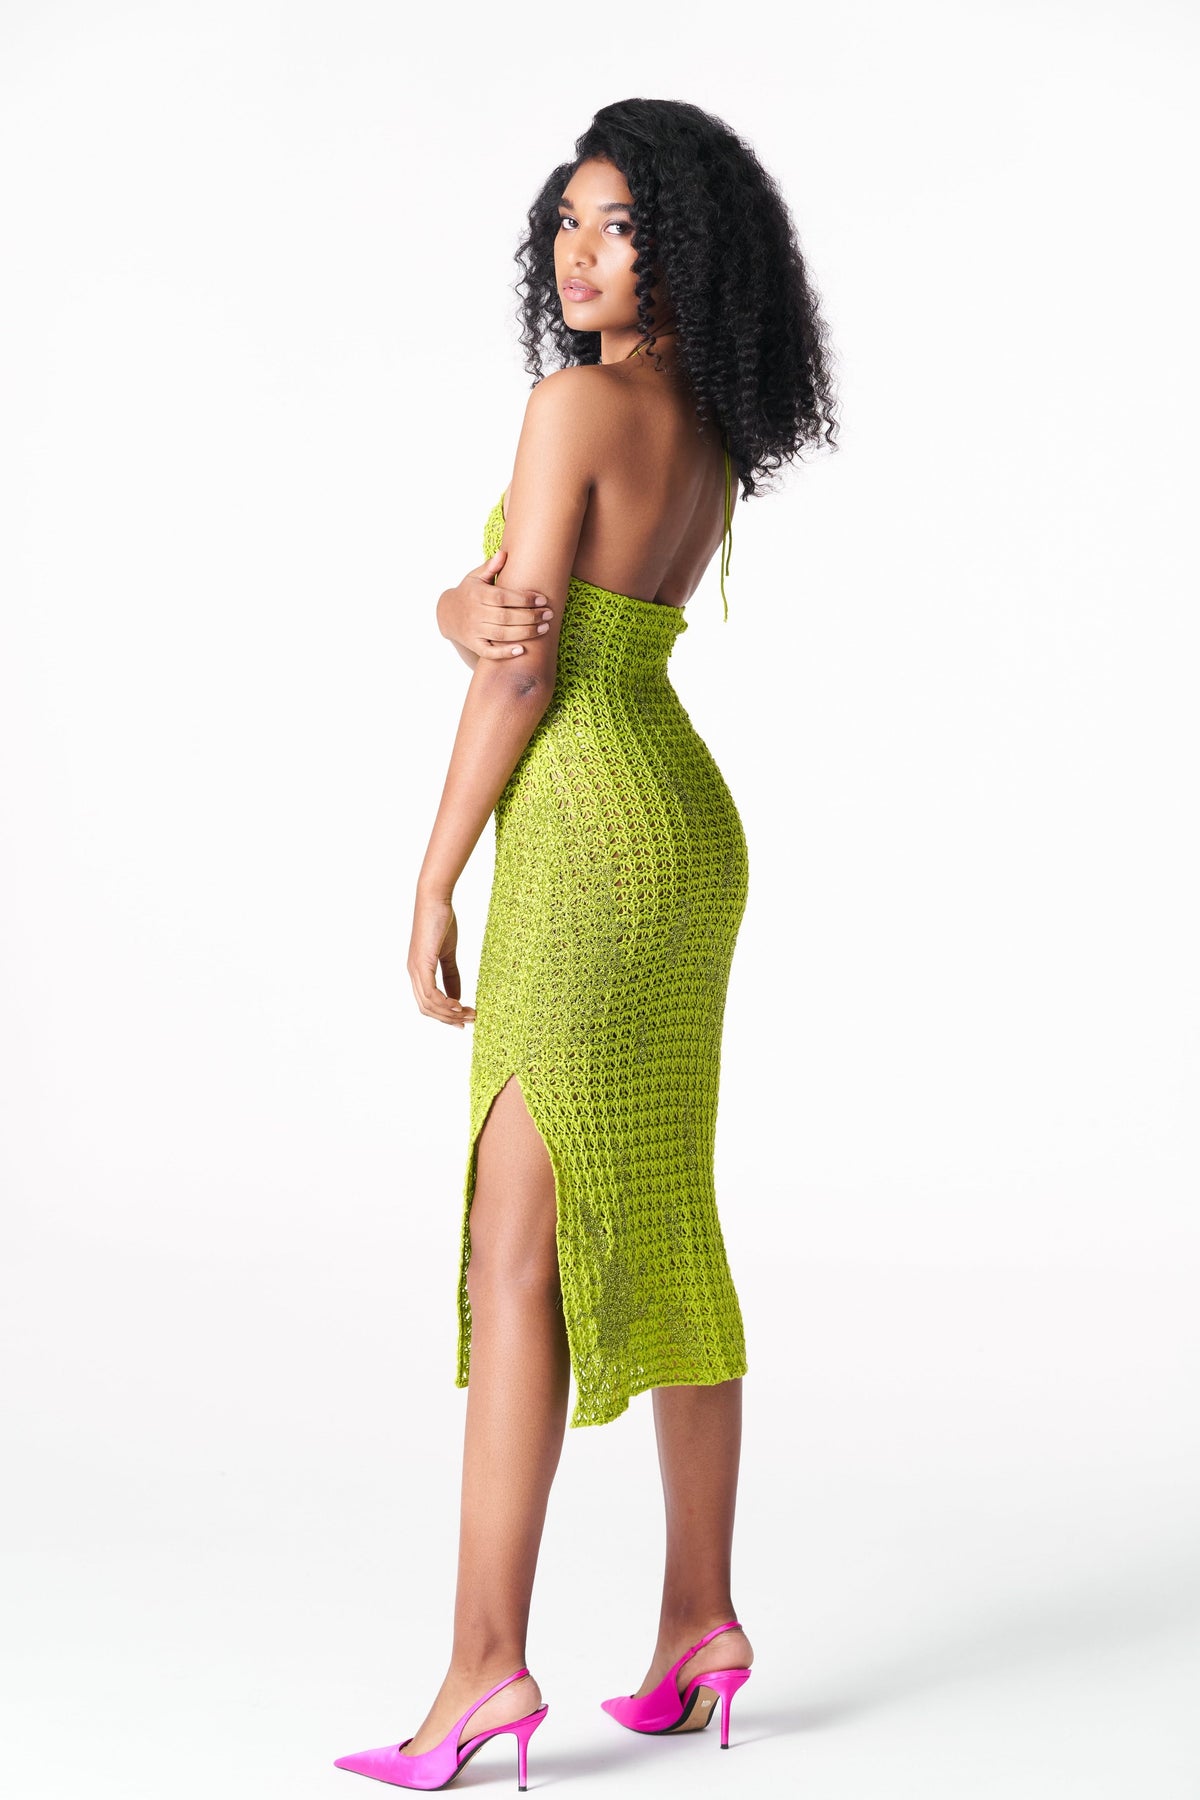 Chartreuse Crocheted Dress